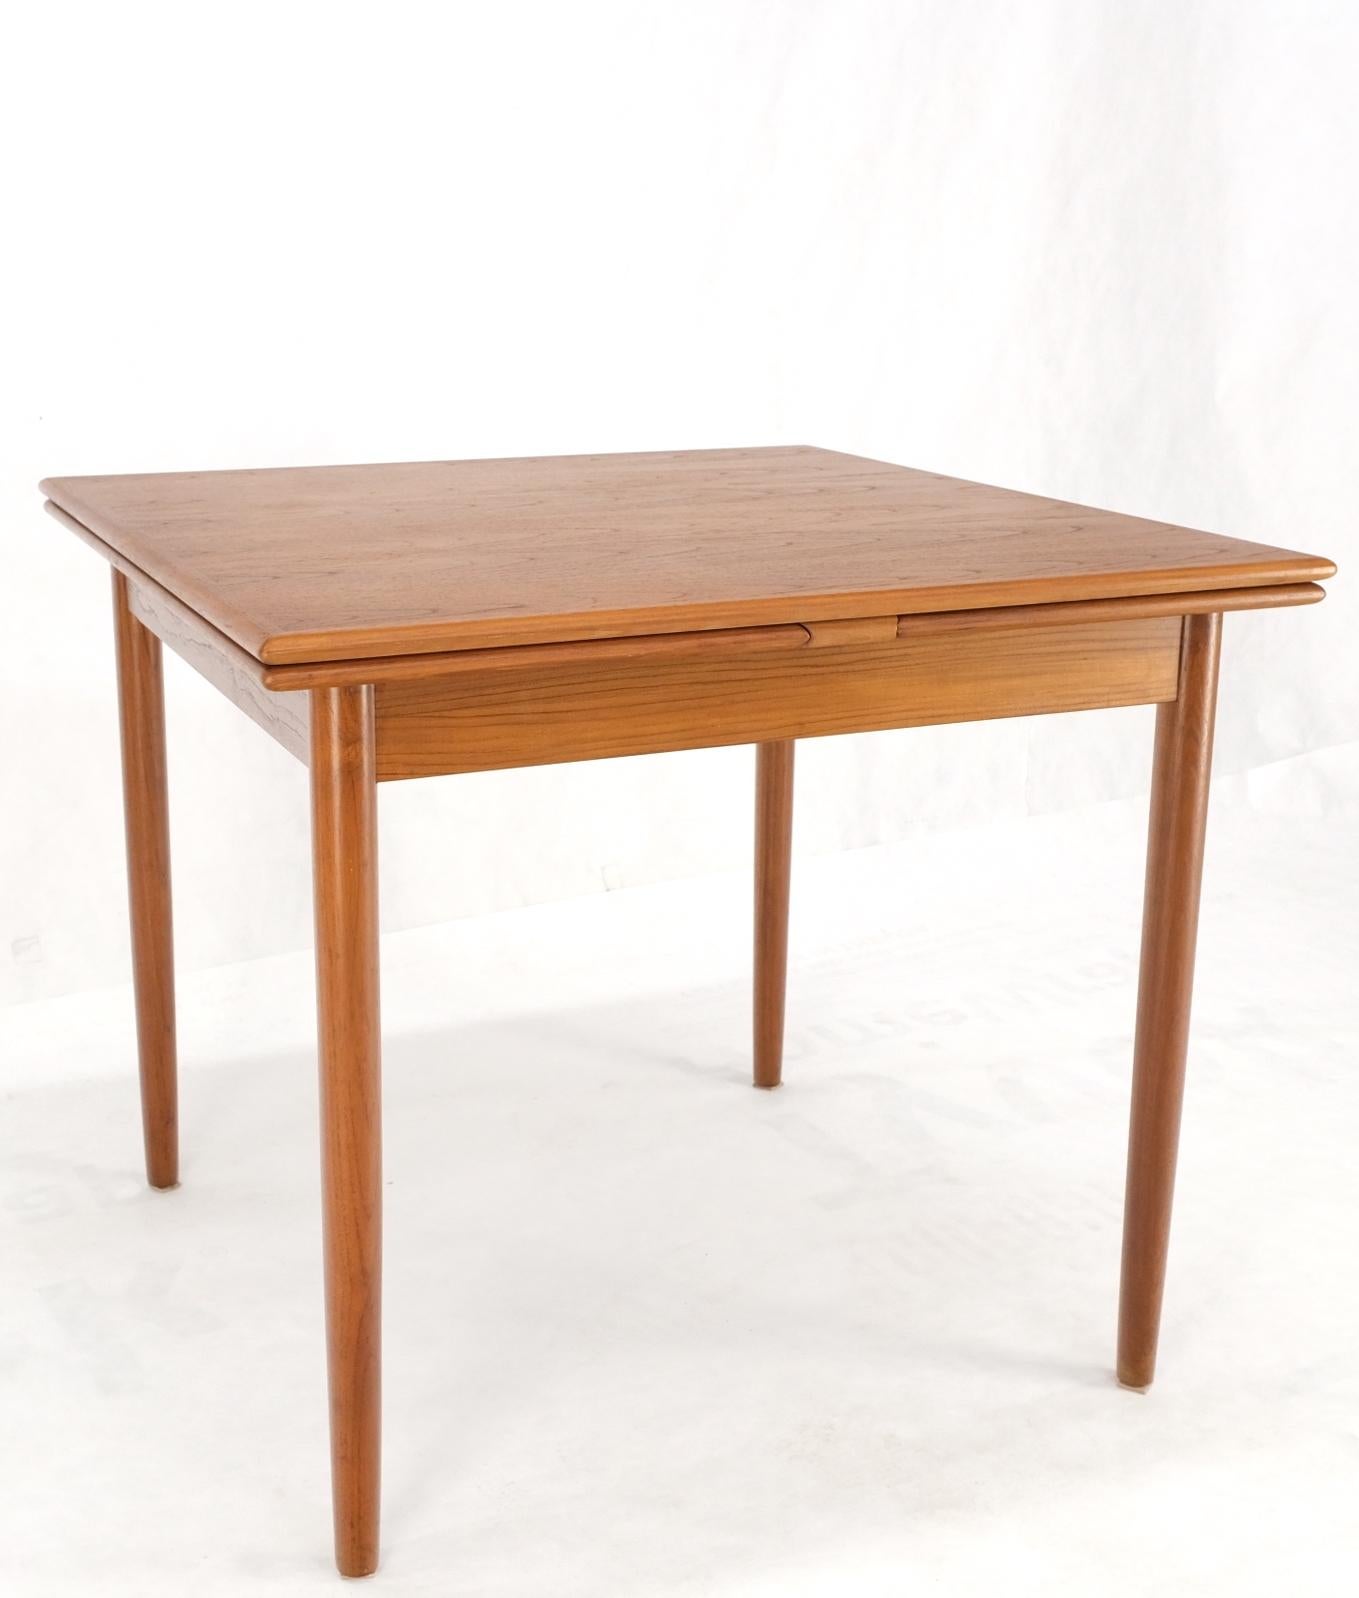 Danish Mid-Century Modern Square Teak Refectory Extension Boards Dining Table For Sale 10